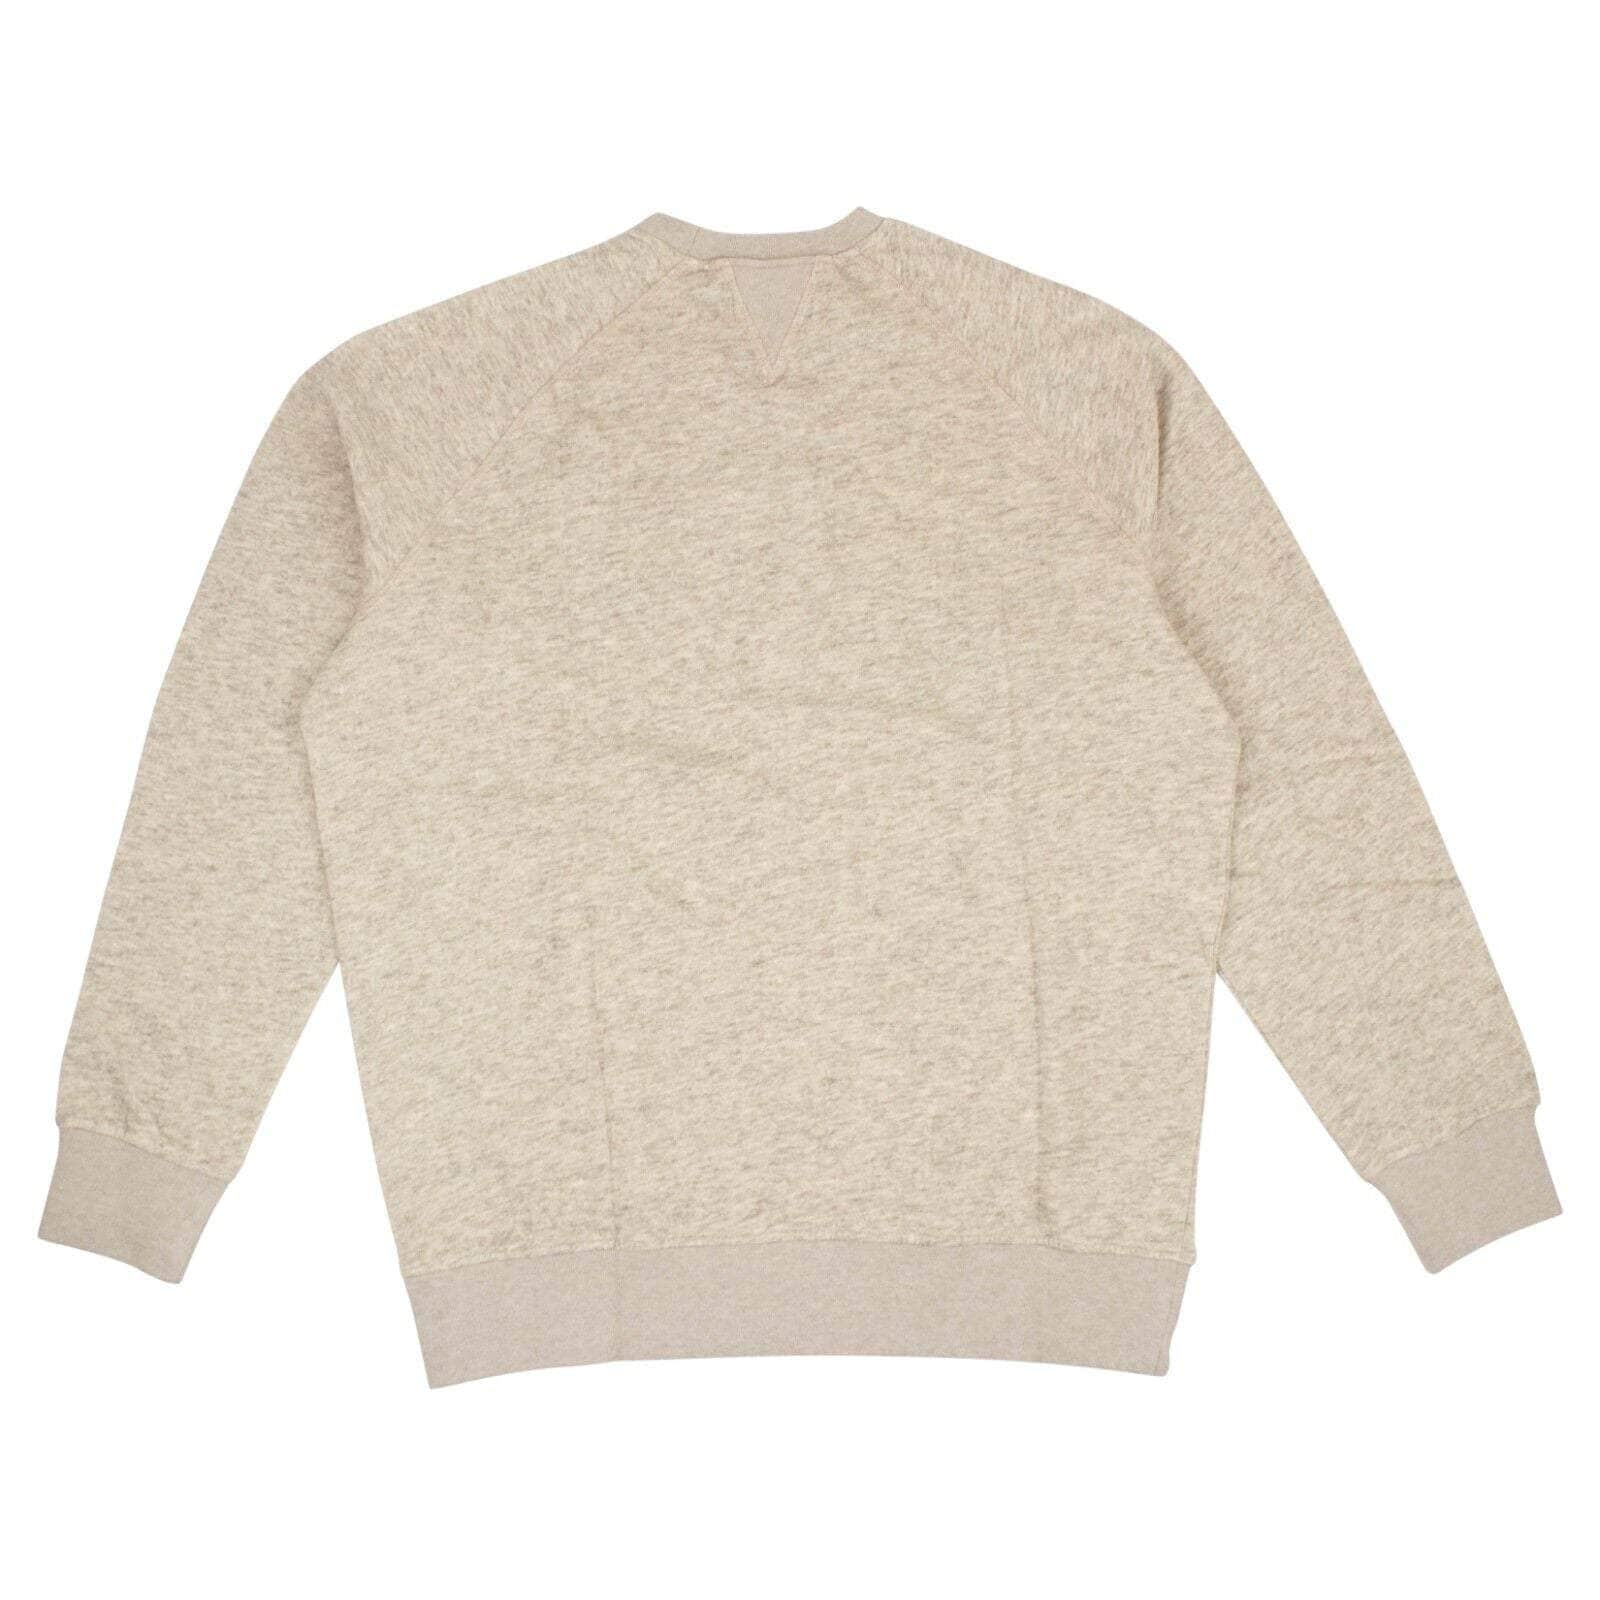 President's channelenable-all, chicmi, couponcollection, gender-mens, main-clothing, mens-crewnecks, mens-shoes, MixedApparel, presidents, size-l, size-xl, under-250 Beige Crew Yak Wool Pullover Sweater